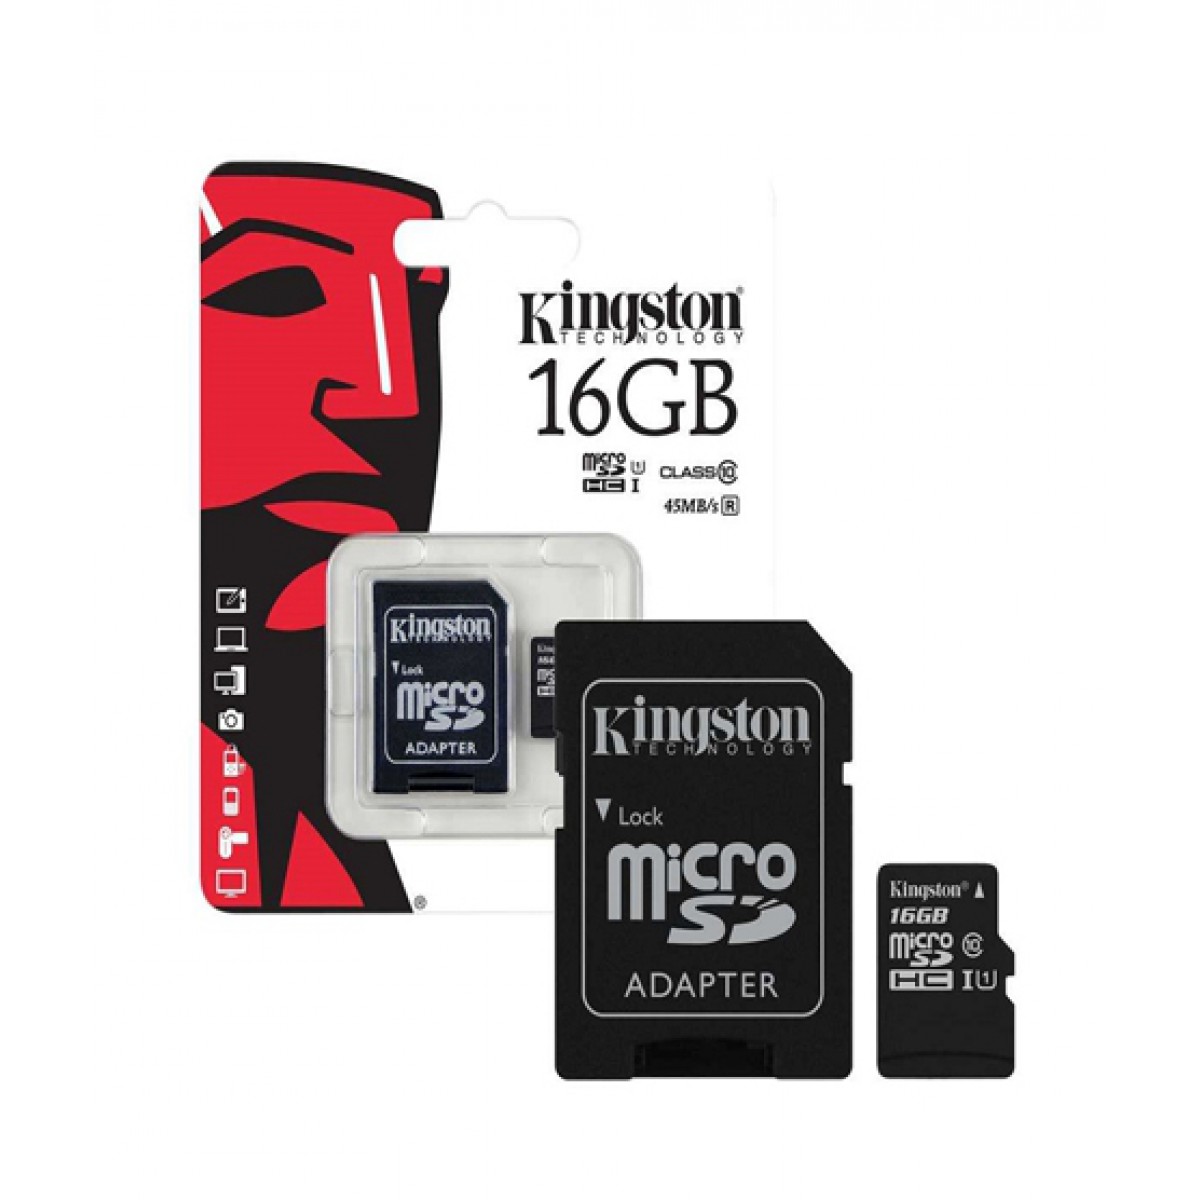 Kingston 16 GB Micro SD Card with Adapter